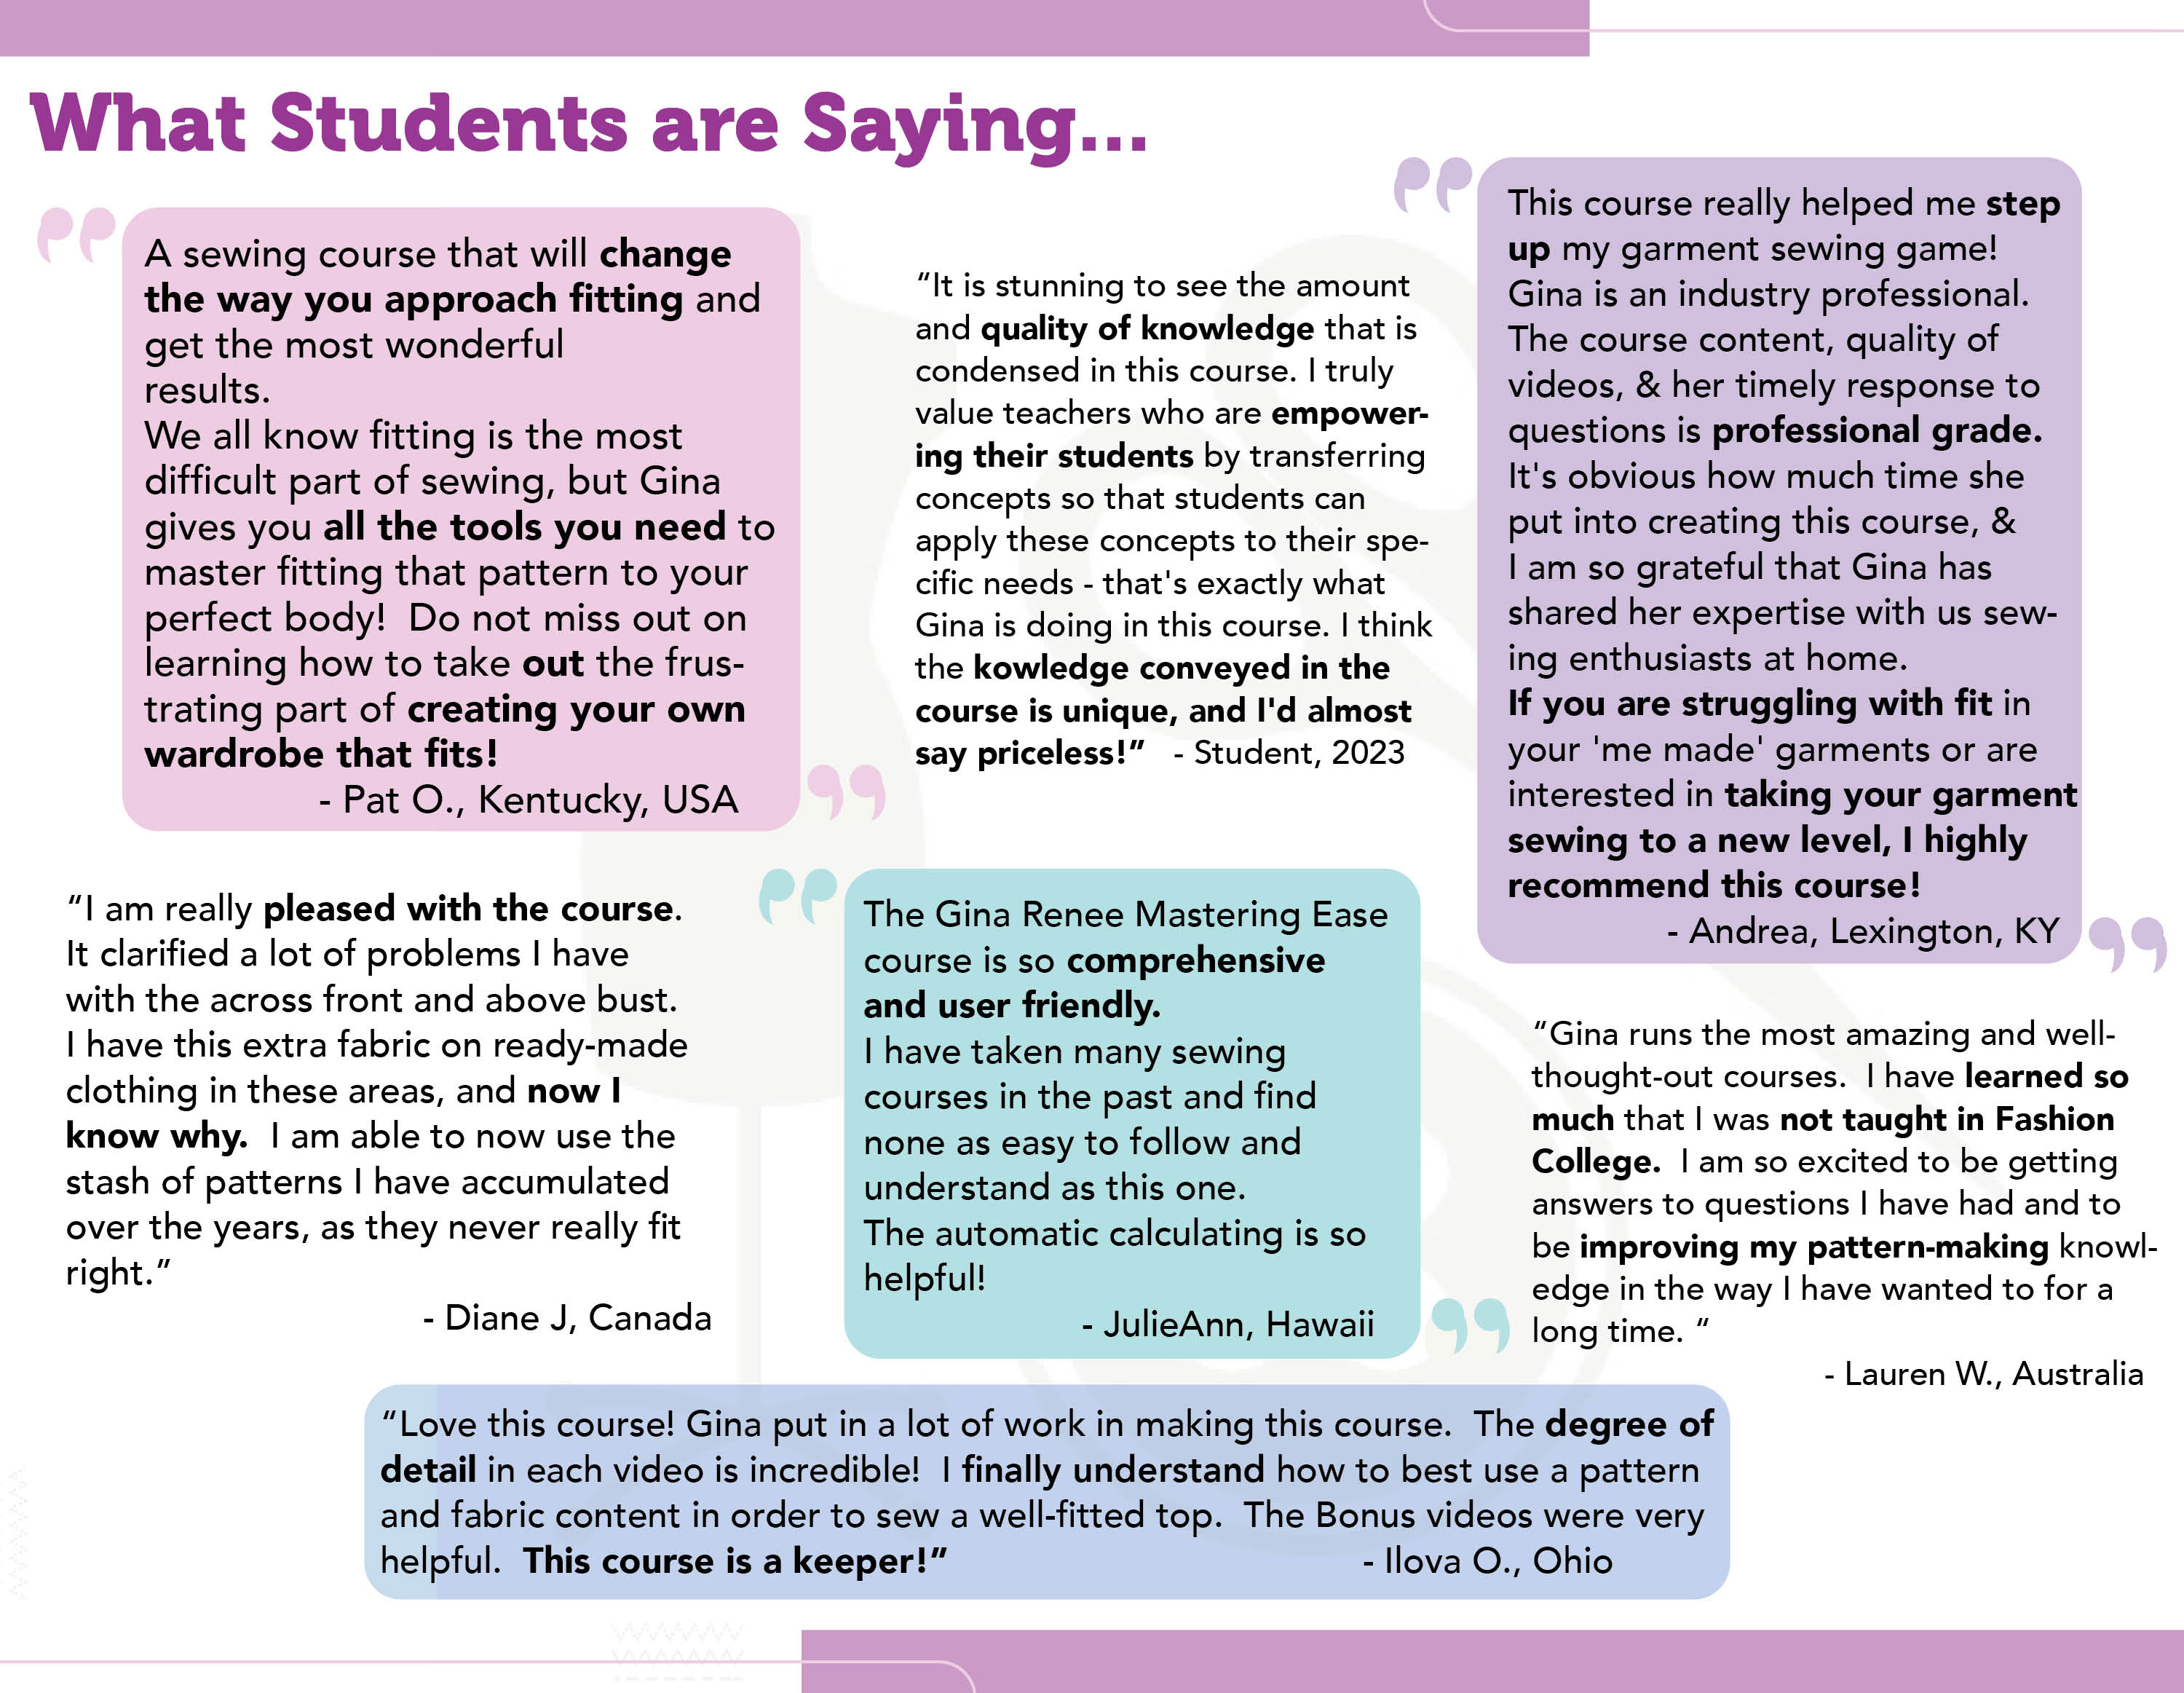 Quotes of what students have said about the mastering garment ease course